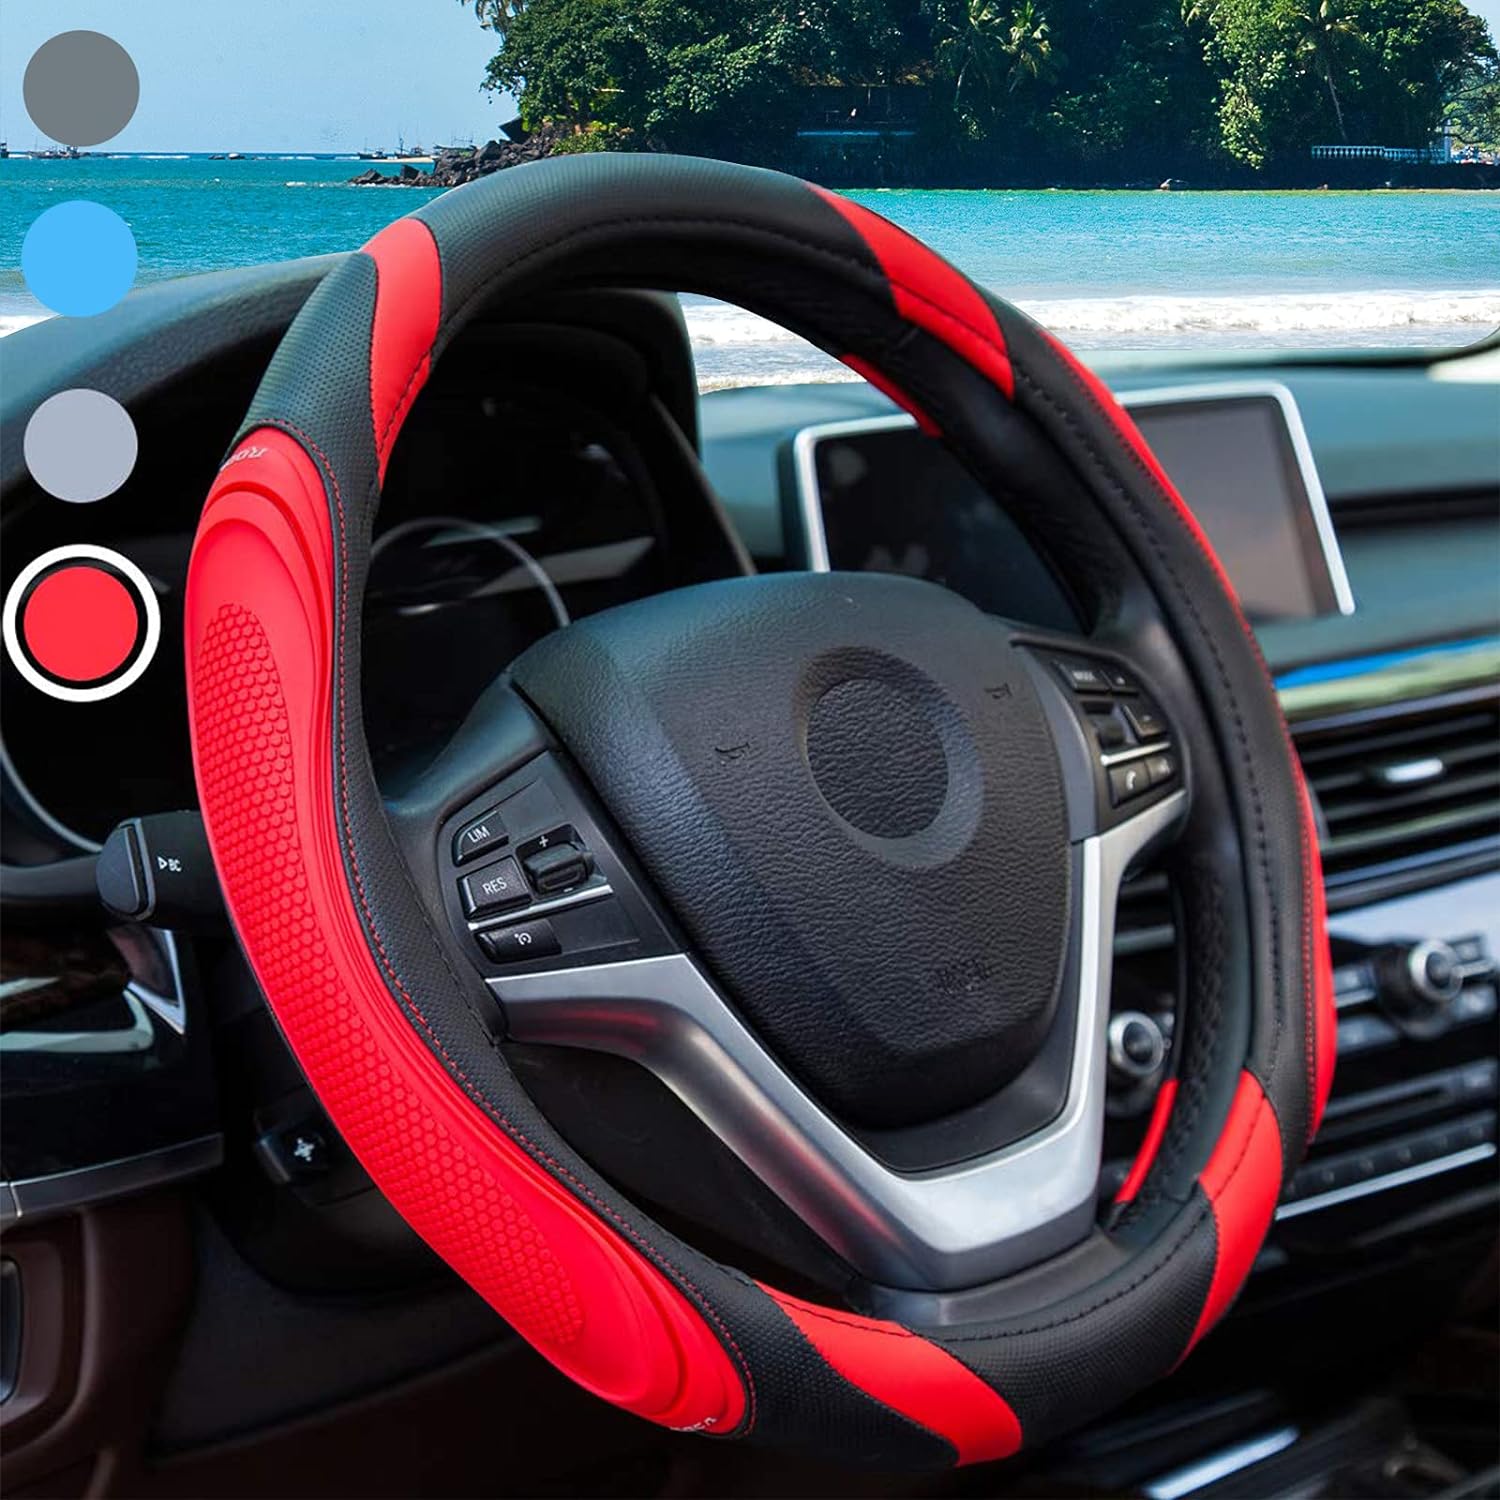 Car Steering Wheel Cover - Sportage Leather Steering Wheel Cover Universal Size M 37-38cm /14.5-15inch, Anti-slip, Breathable, Red